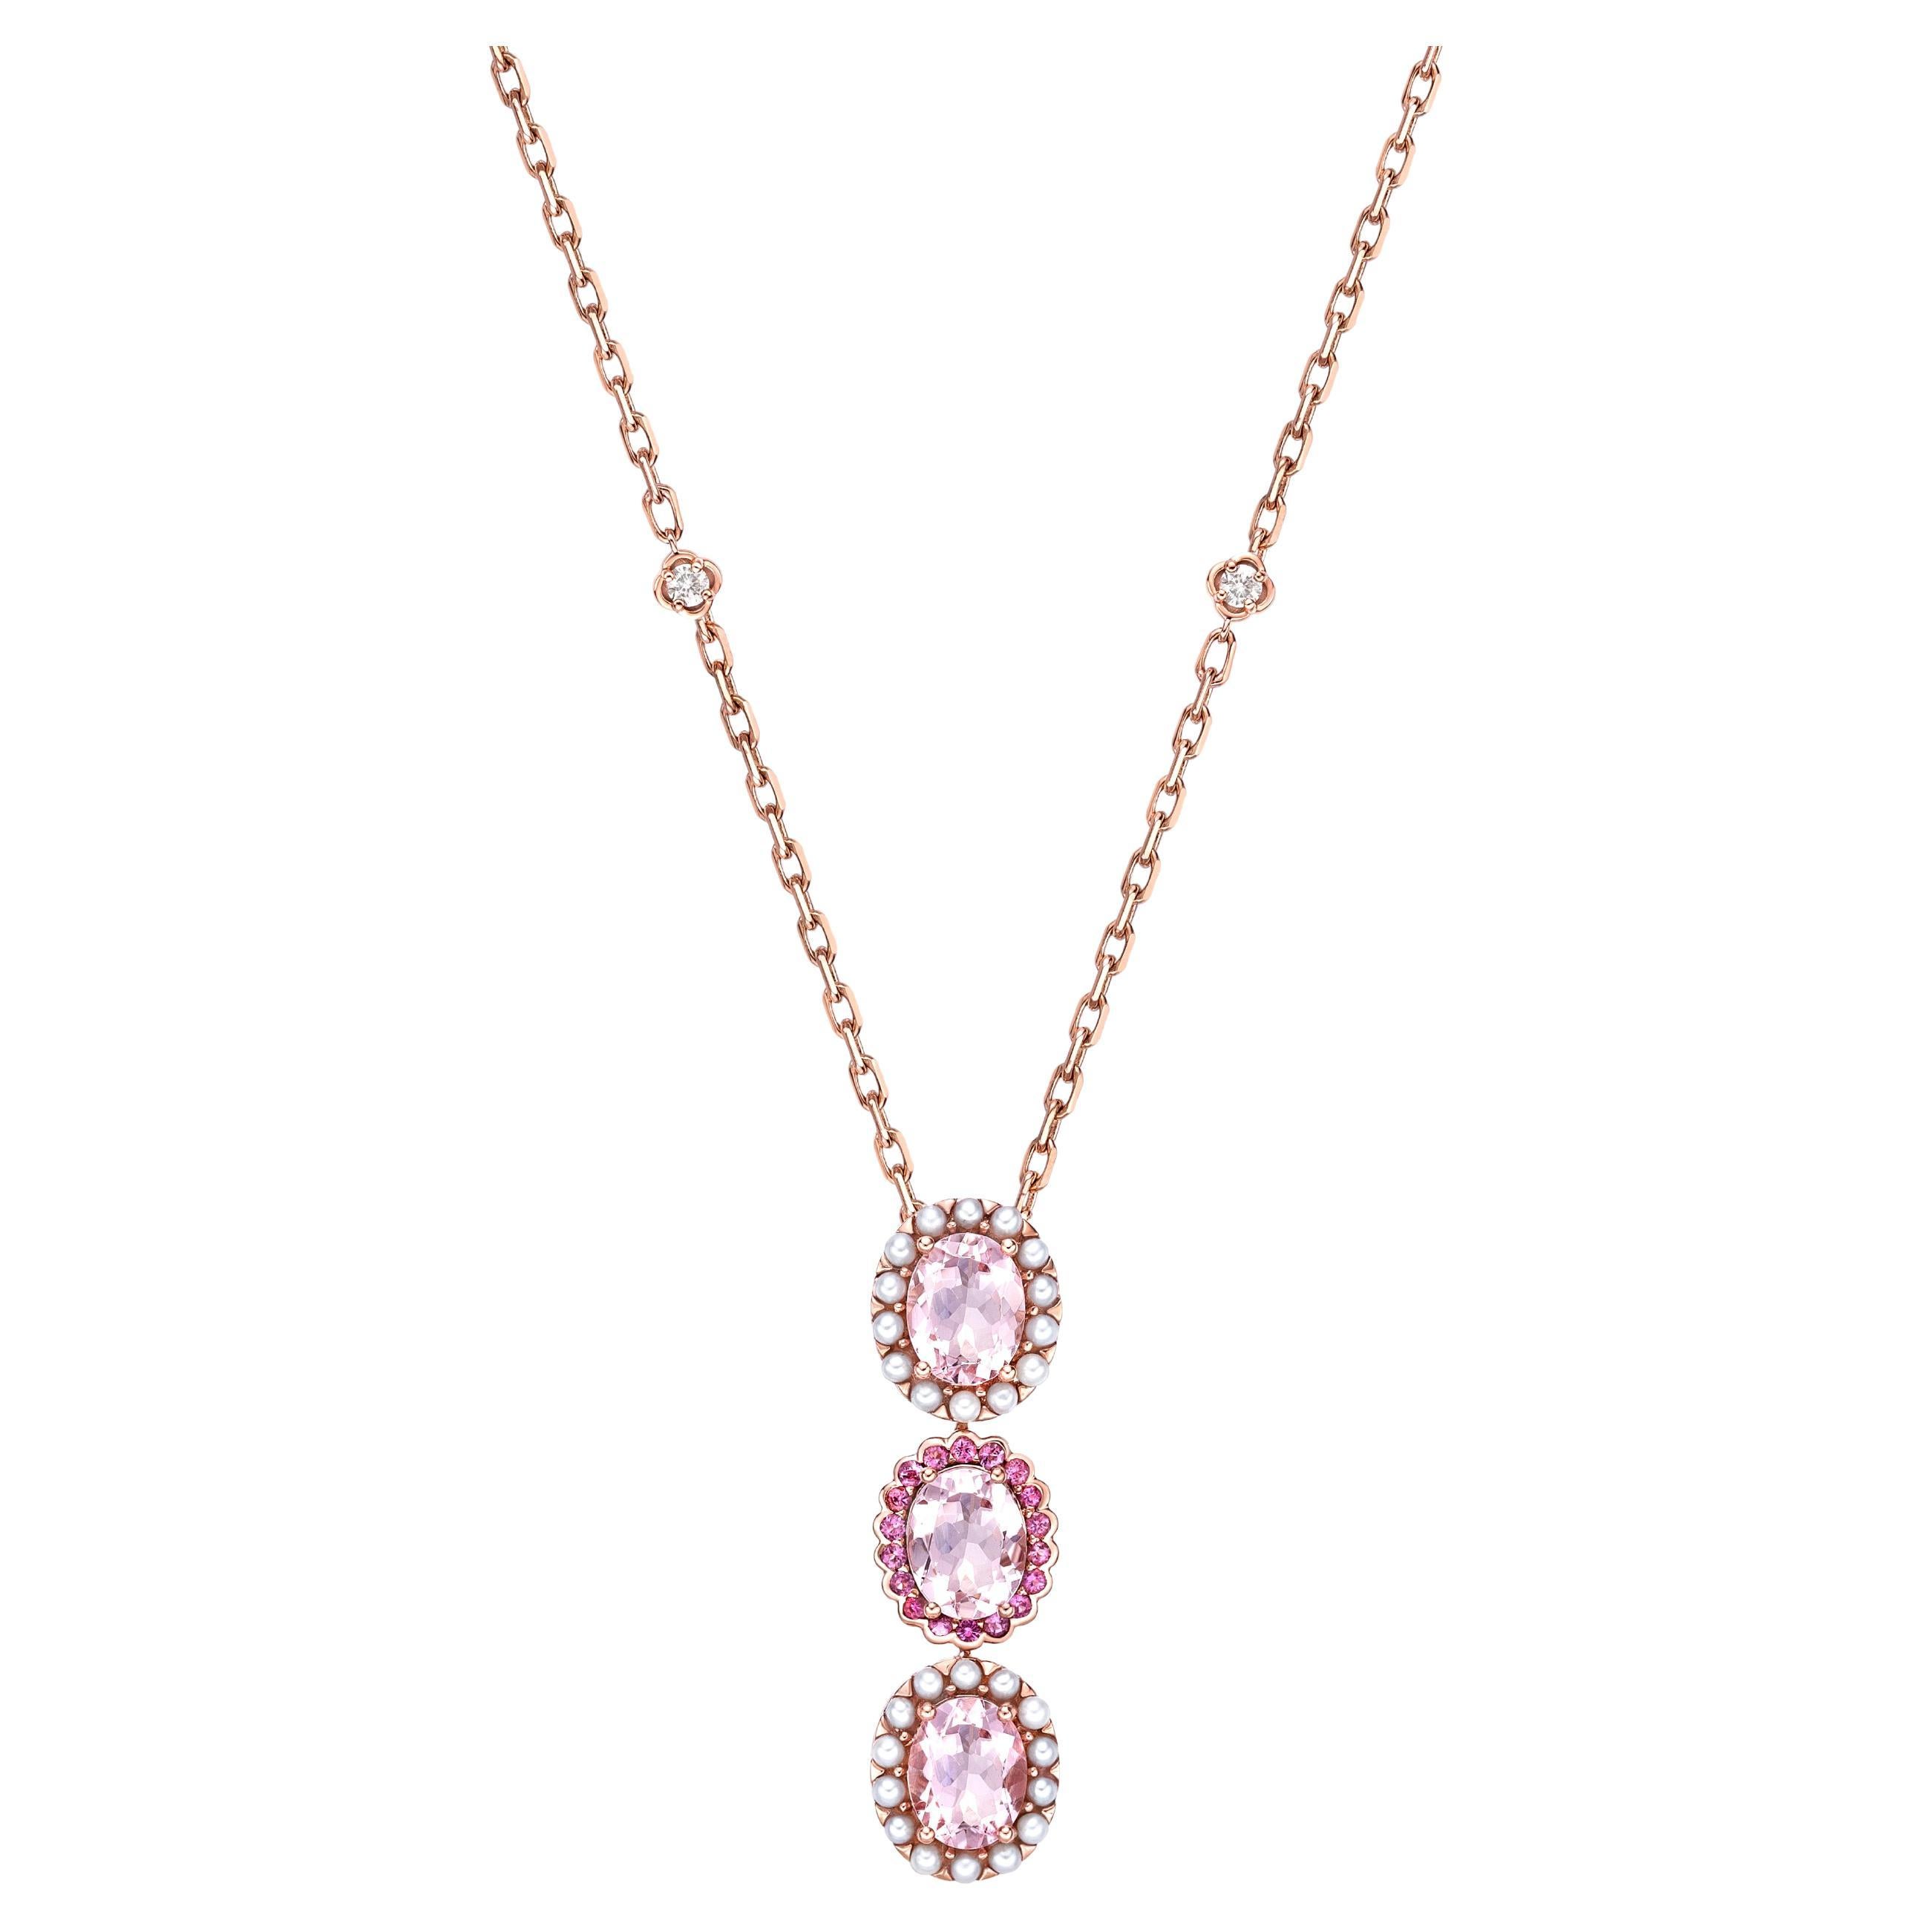 Pink Morganite Pendant Necklace with Tourmaline, Pearl & Diamond in 18KRG. For Sale